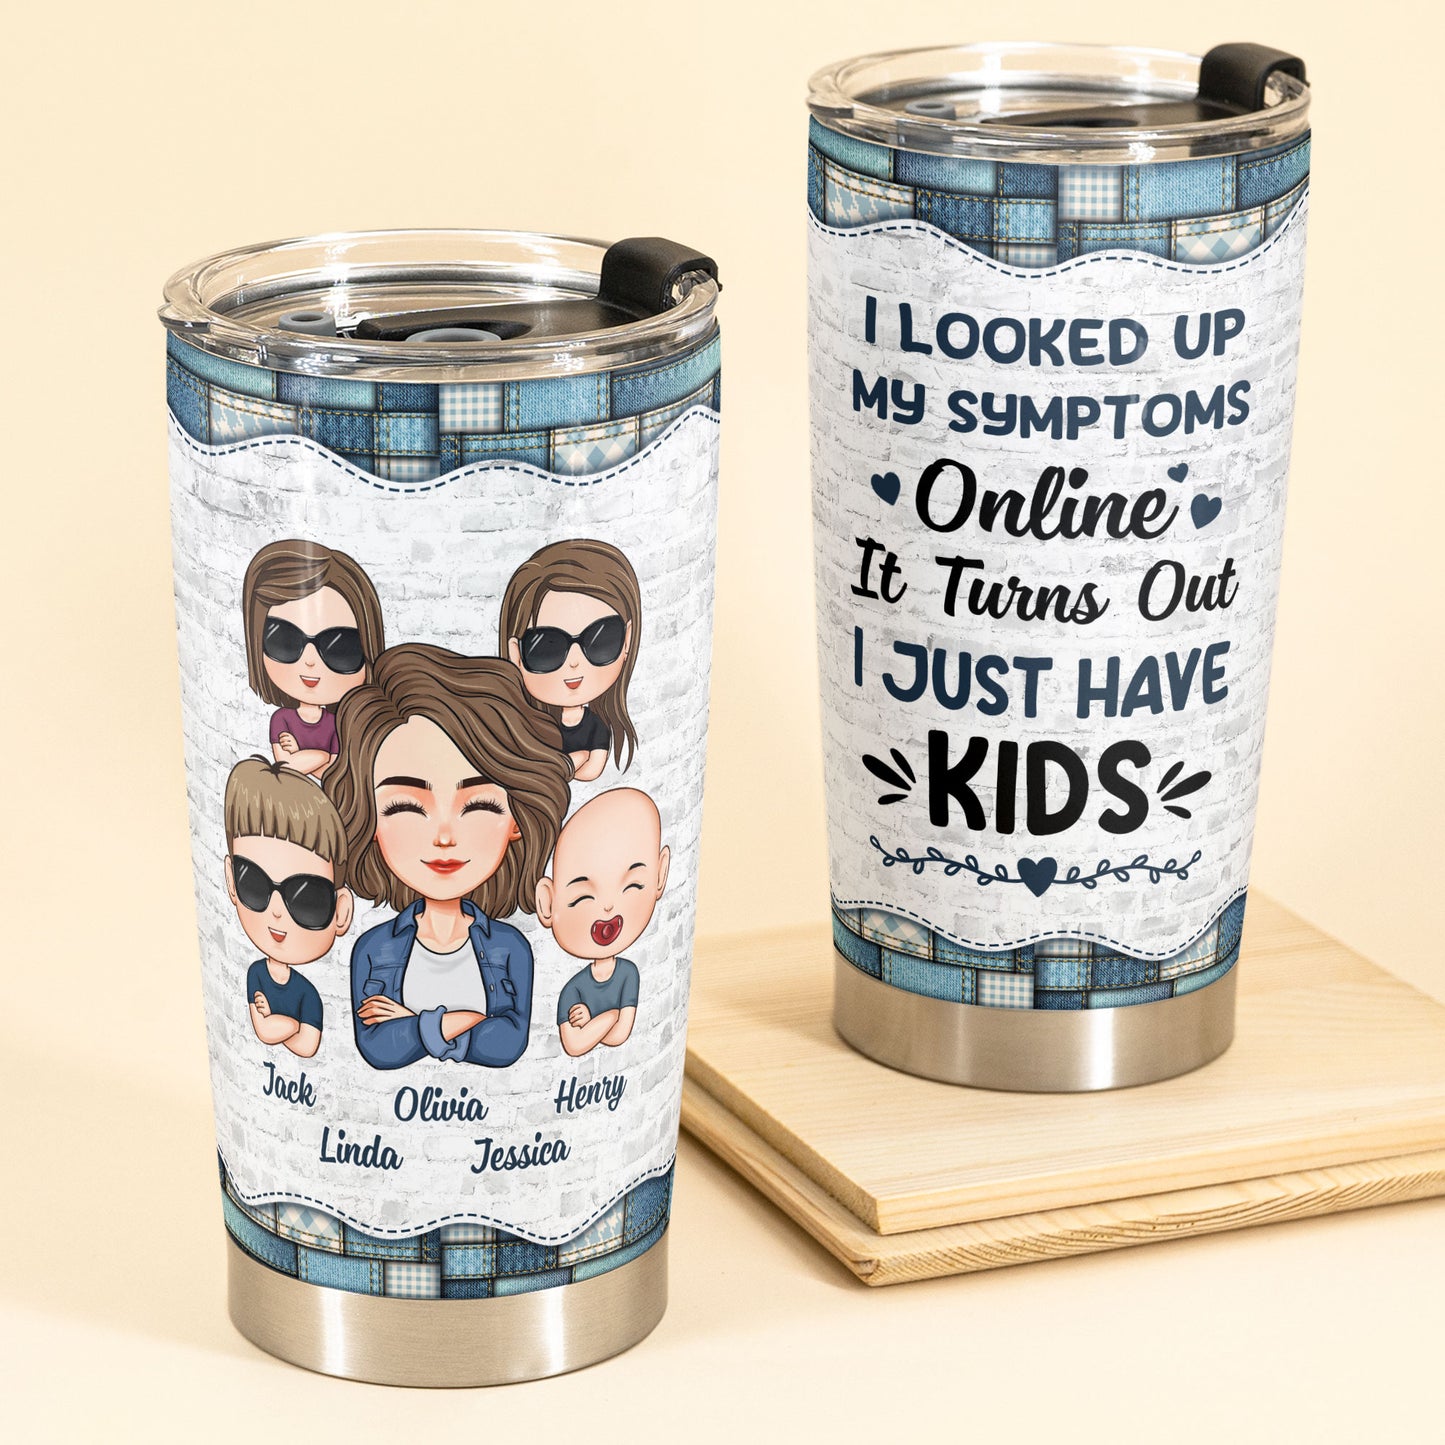 https://macorner.co/cdn/shop/products/Looked-Up-My-Symptoms-Turns-Out-I-Have-Kids-Personalized-Tumbler-Cup-MotherS-Day-Birthday-Loving-Gift-For-Mom-Mother-Mum-From-Daughter-Son-1_f9a7dd36-859f-4d79-8908-f22b26aad967.jpg?v=1677064016&width=1445